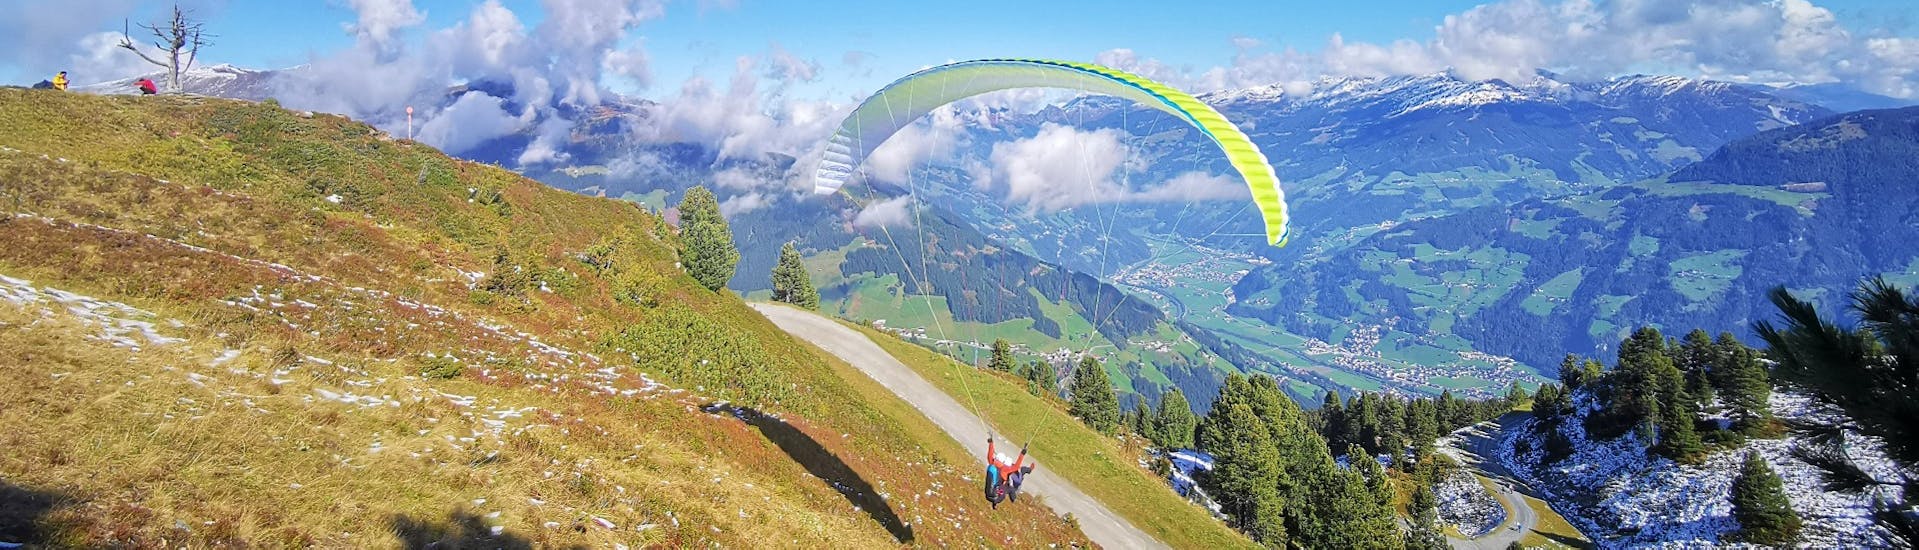 The pilot of AIRflow Tandem Paragliding Zillertal takes off with the customer for his booked tandem paragliding premium flight in a beautiful summer landscape.